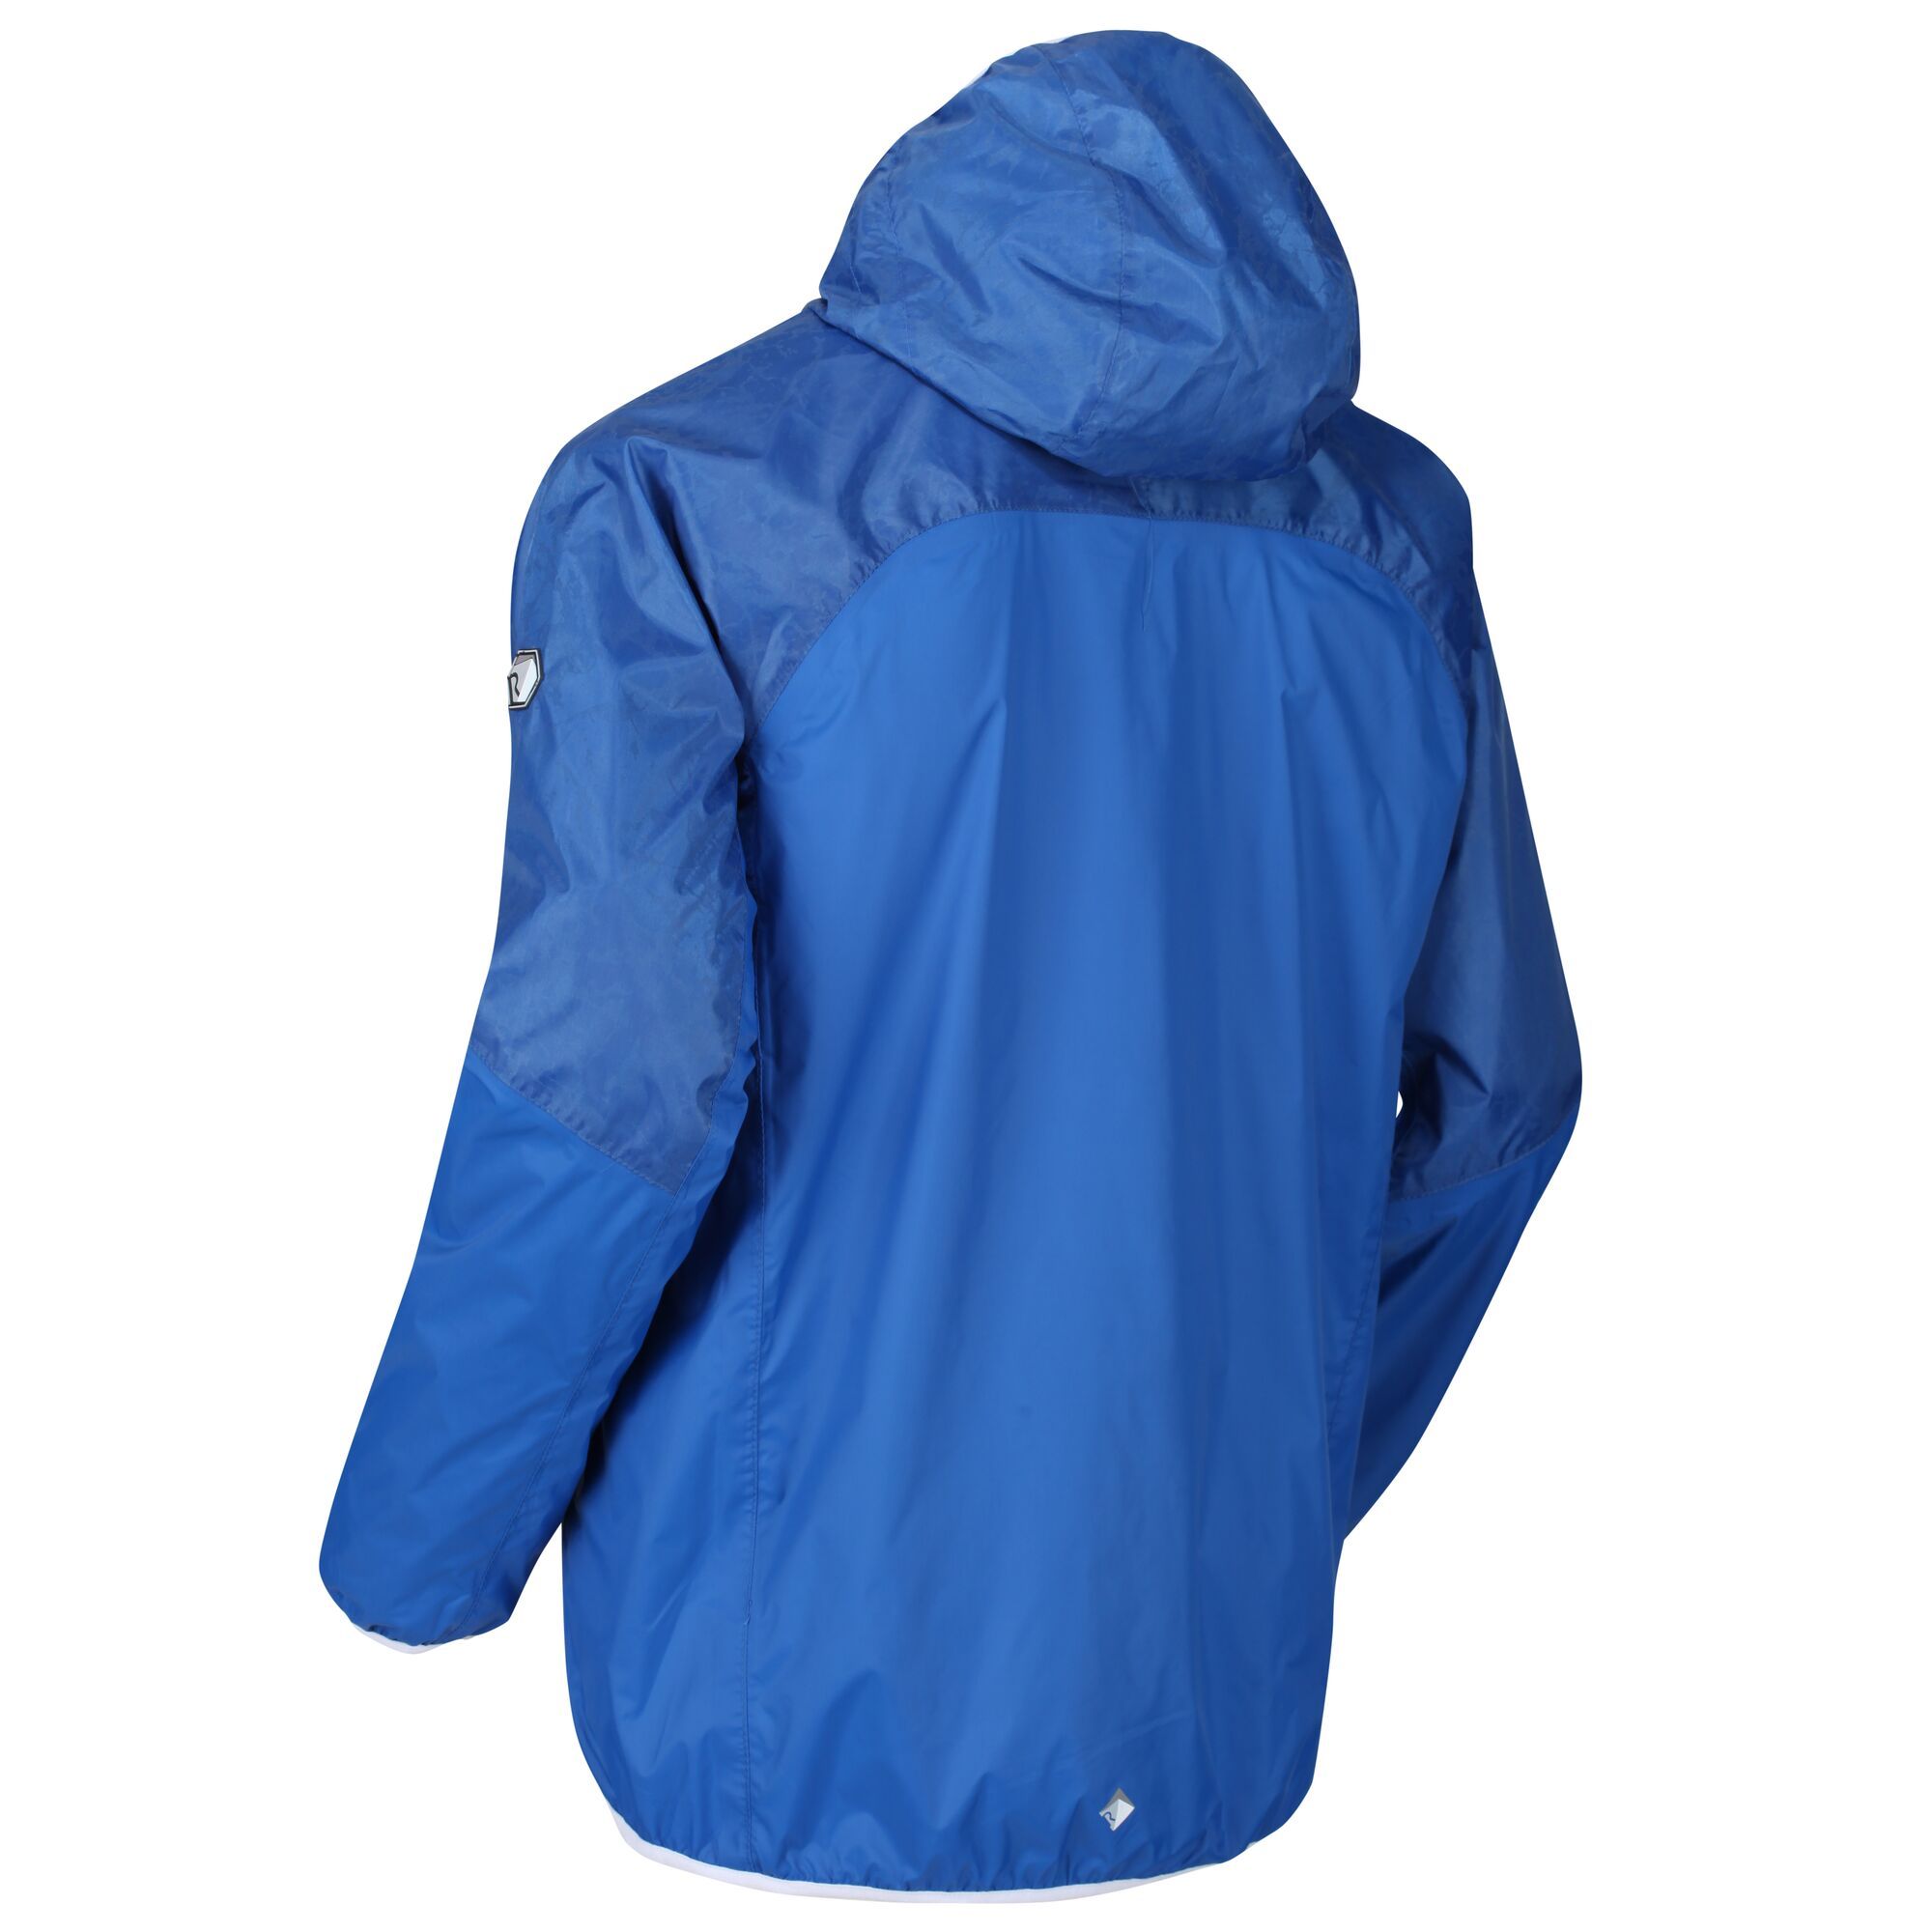 Waterproof hooded jacket with stretch trim on hood, cuffs, and hem. Made from lightweight Isolite 5000 fabric. Mesh lining on hood. Ideal for wet weather or as a light layer. 100% polyamide. Hand wash.